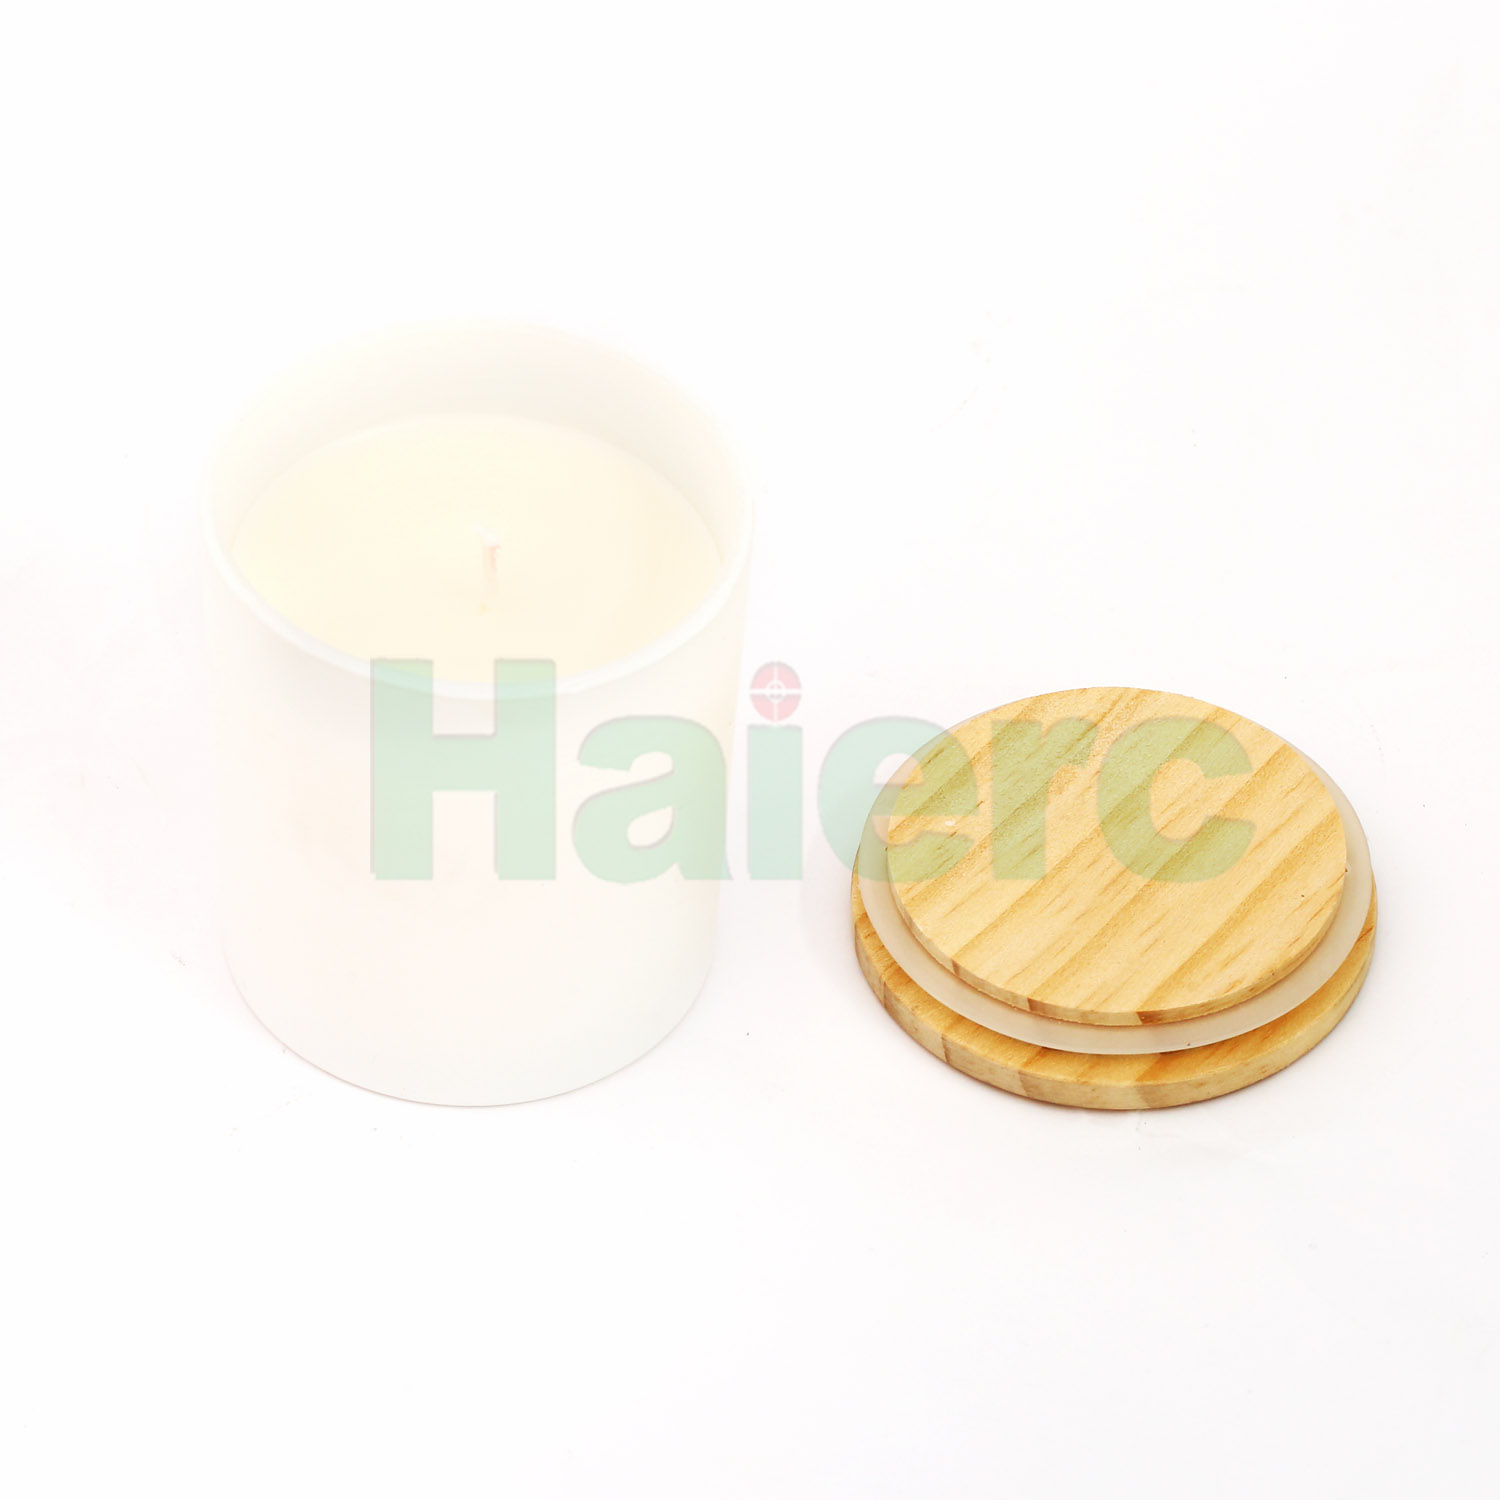 Haierc Wholesale Candles Home Bedroom Insect Bee&Soy Wax Anti-mosquito Scented Candles